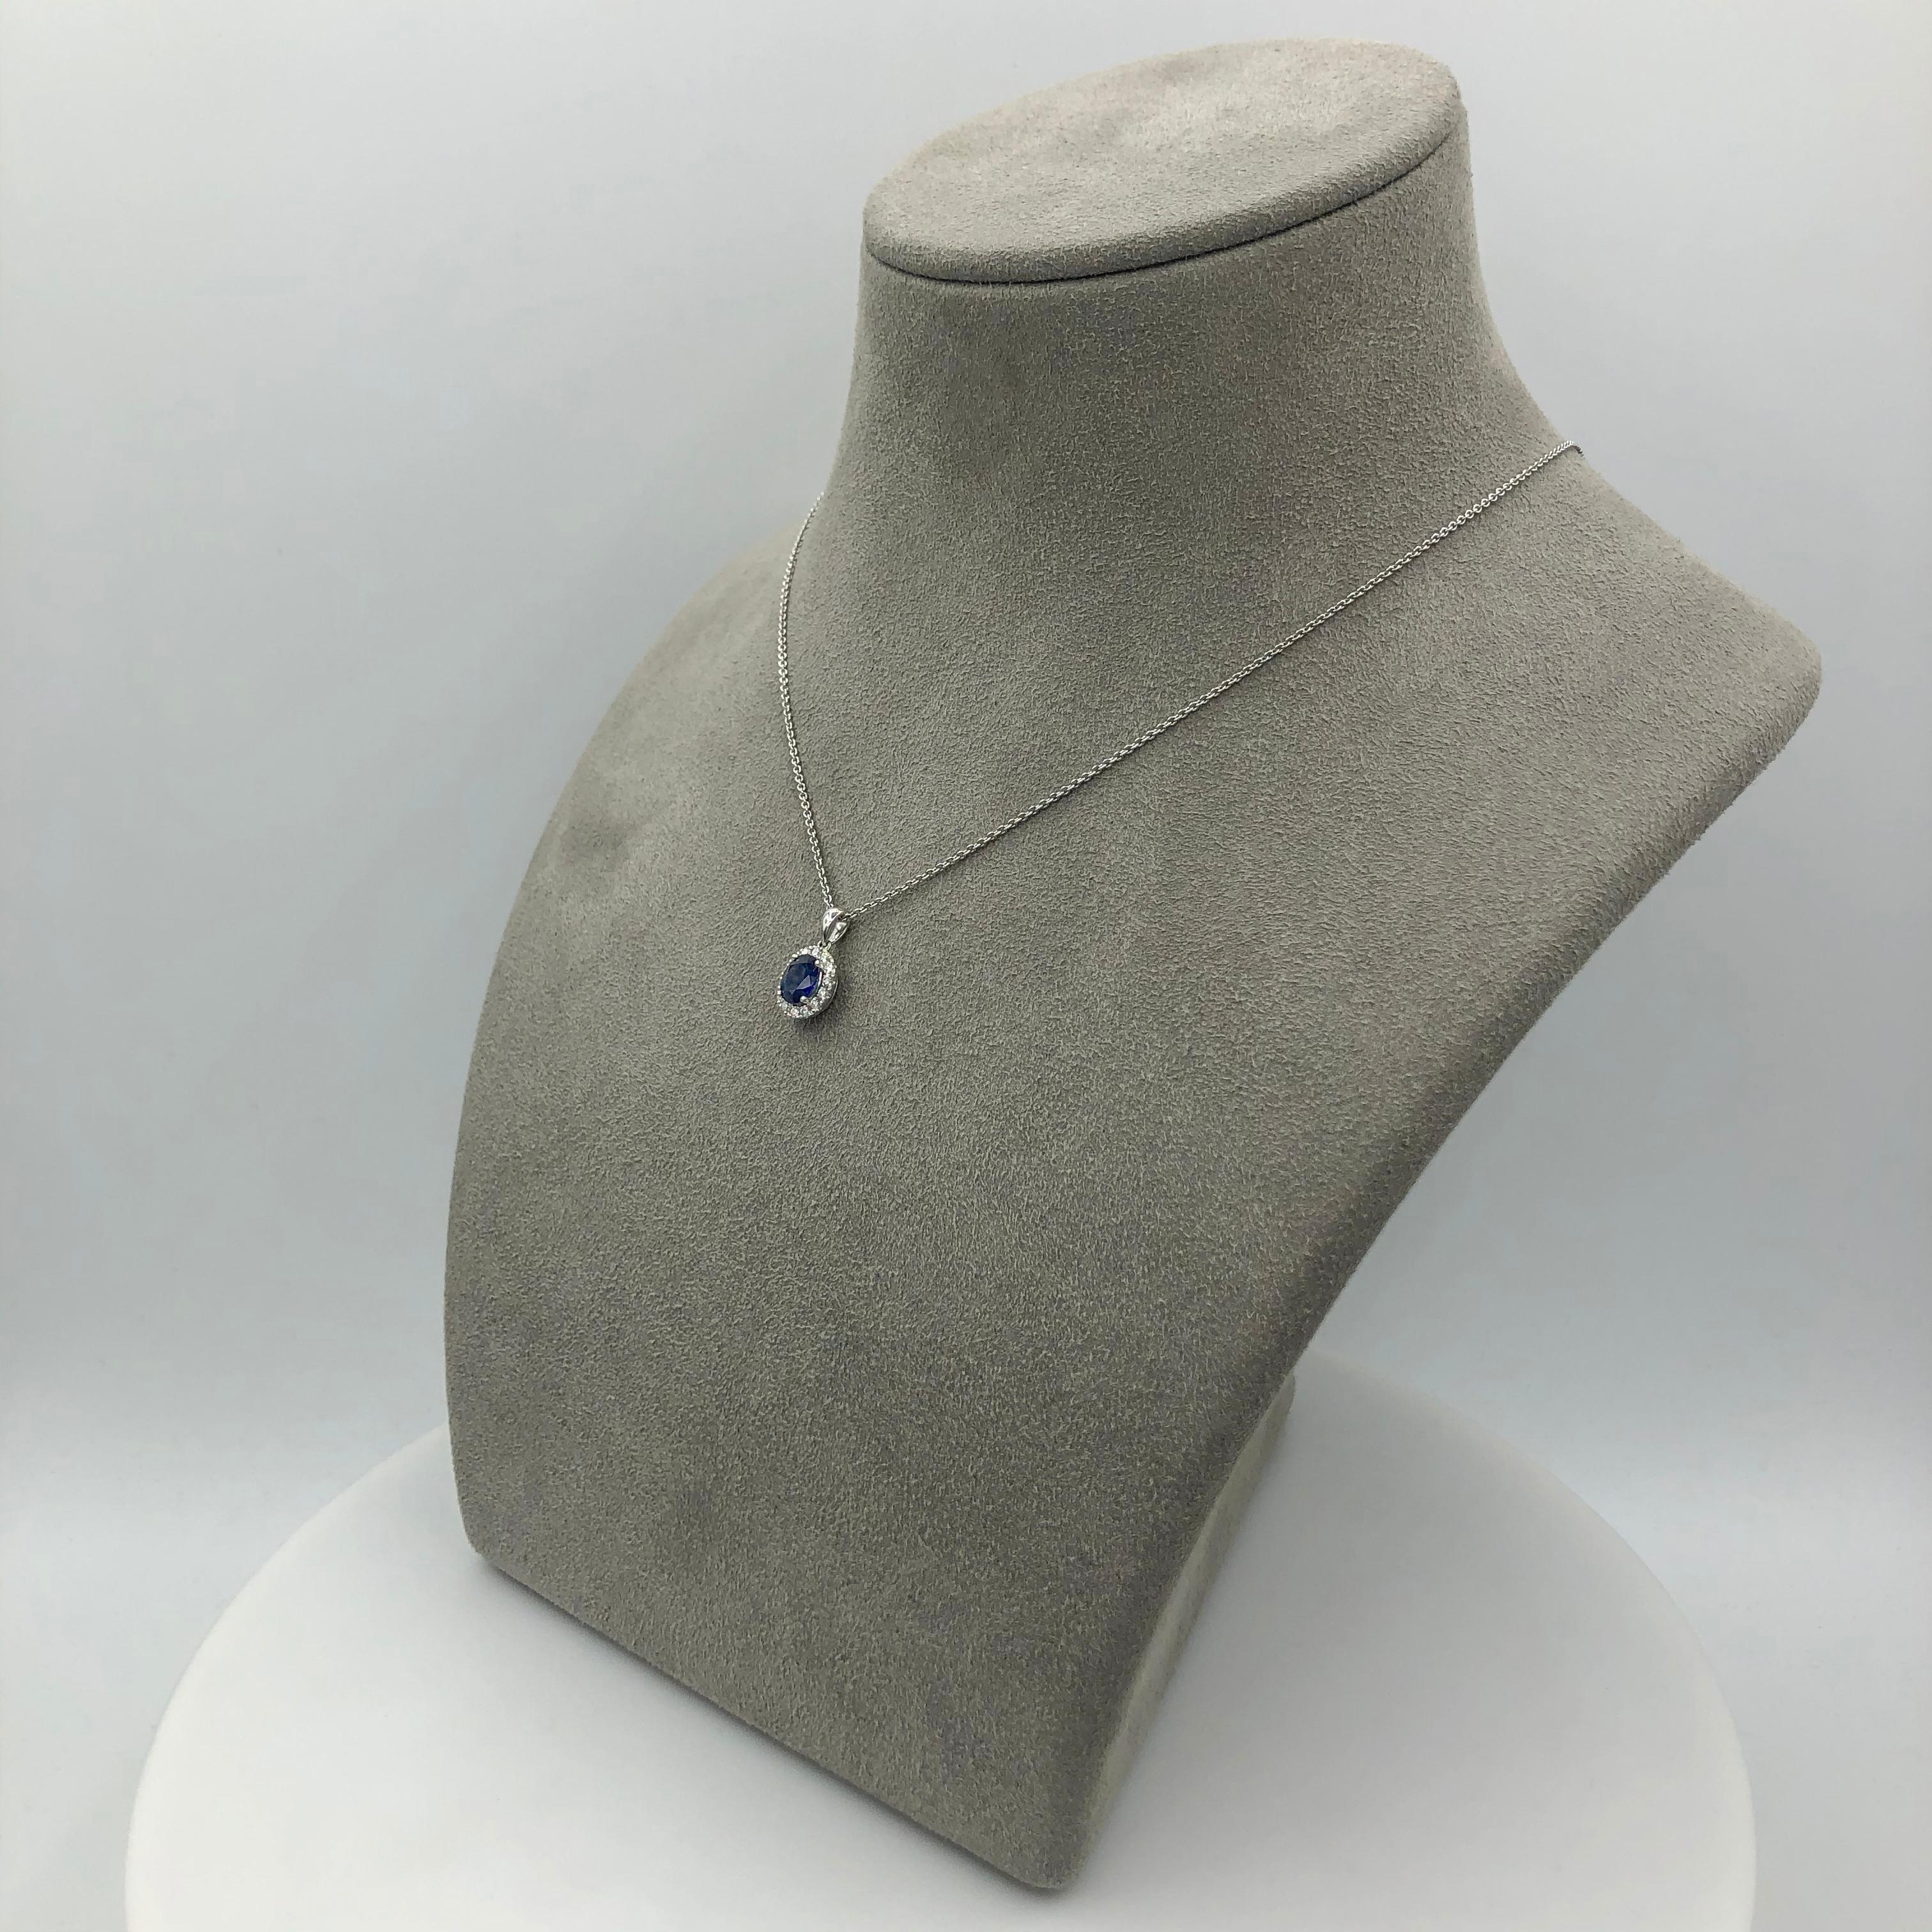 Roman Malakov 0.73 Carats Blue Sapphire with Diamond Halo Pendant Necklace In New Condition For Sale In New York, NY